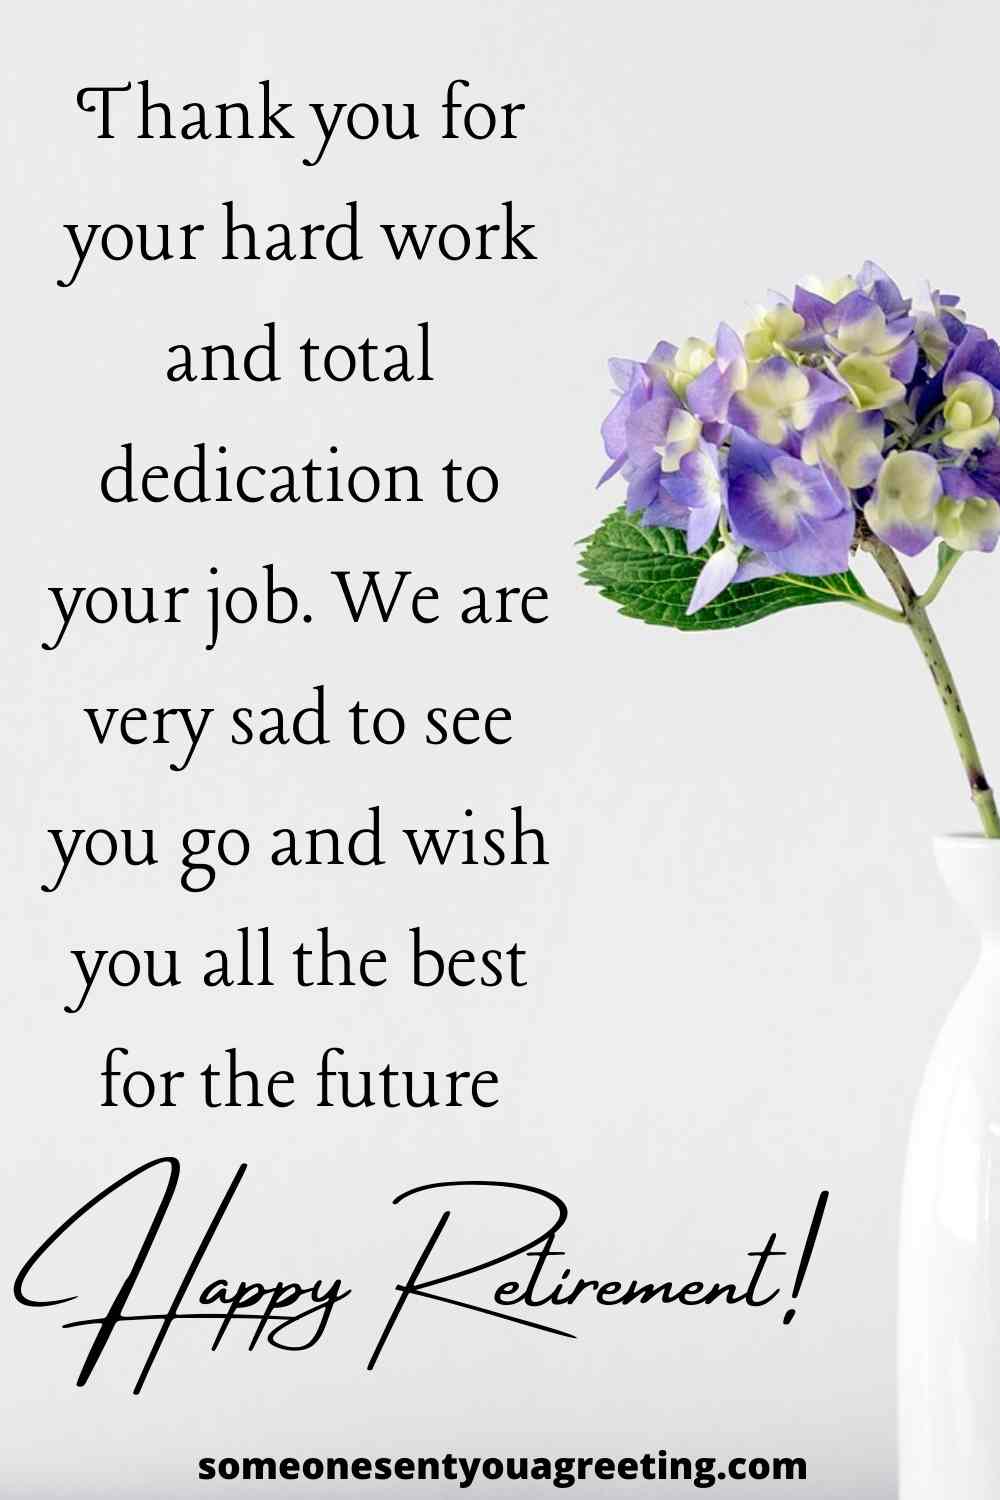 Retirement message for employee